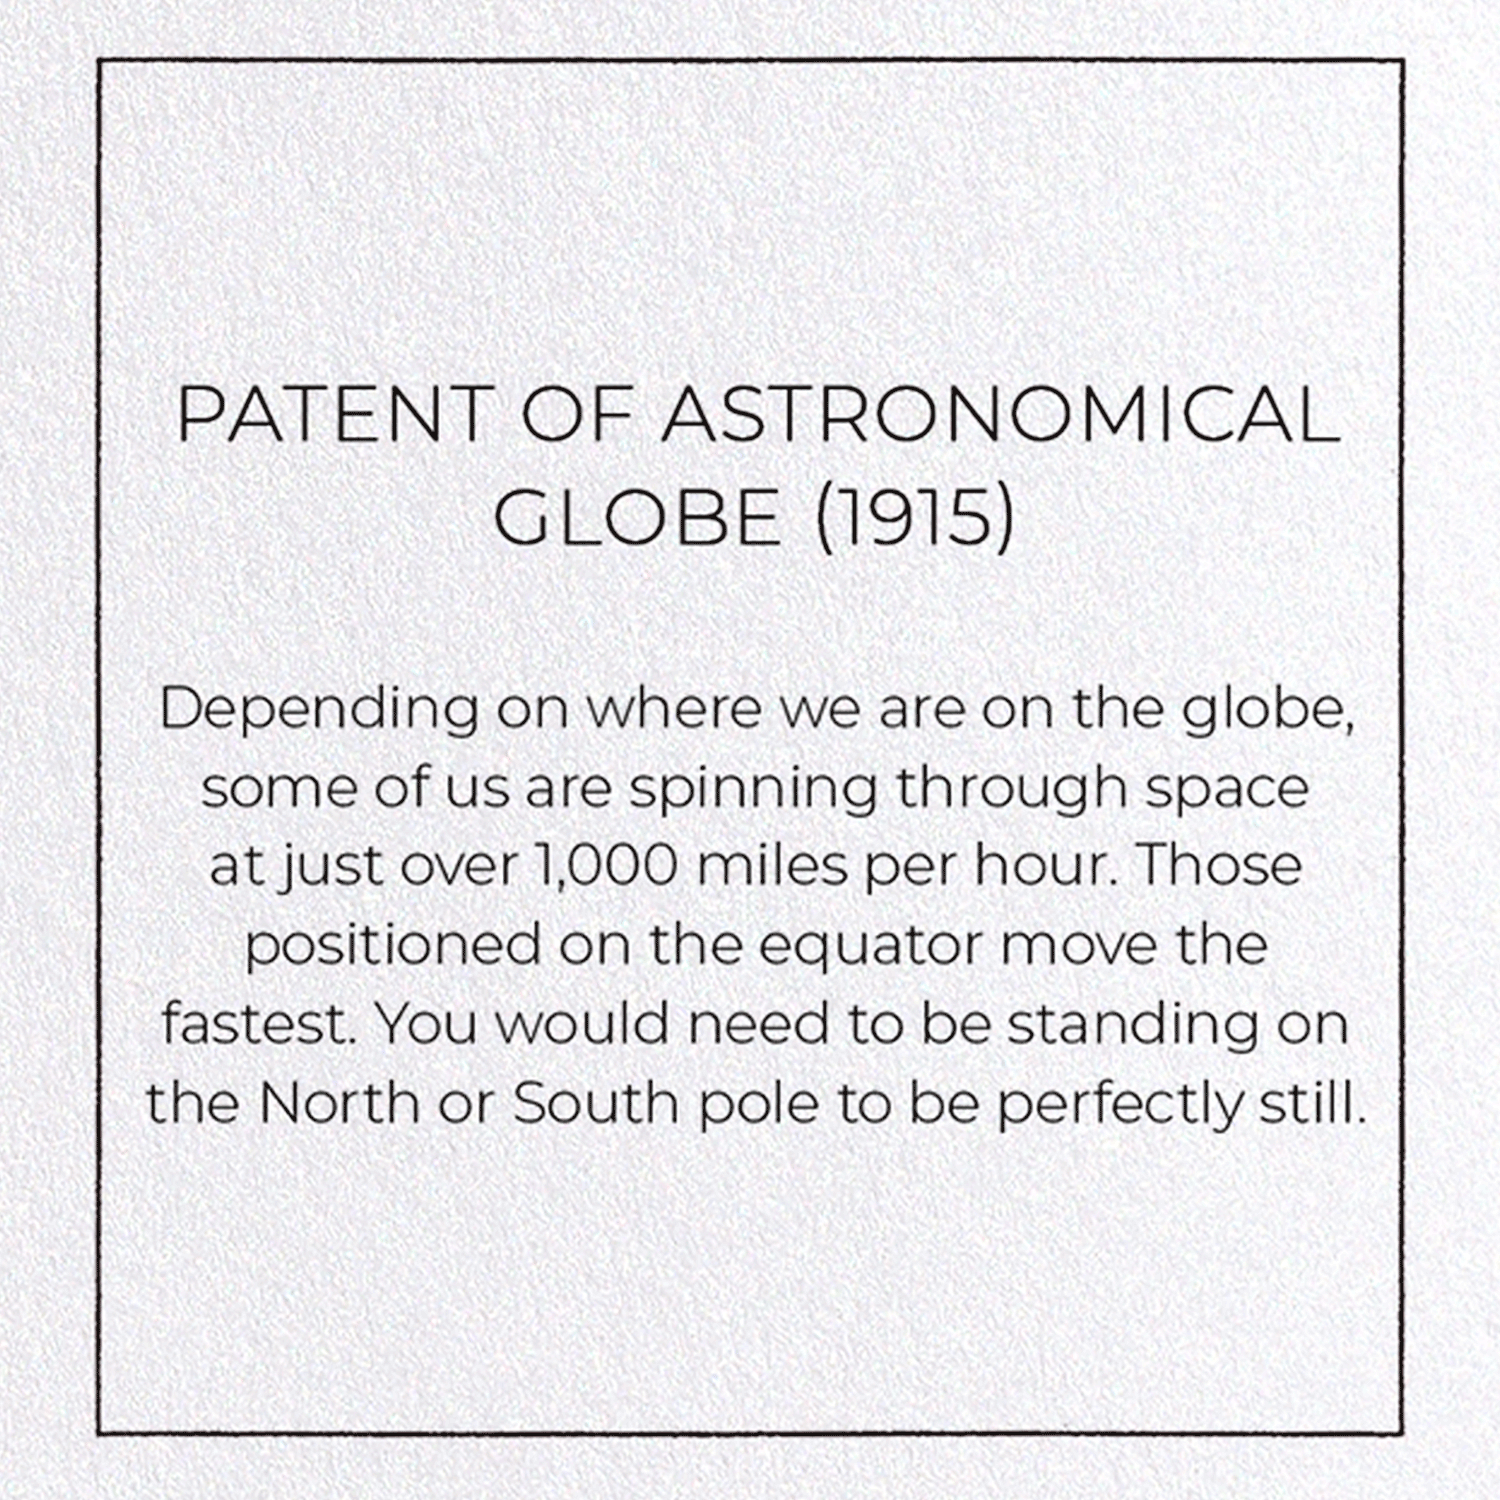 PATENT OF ASTRONOMICAL GLOBE (1915)